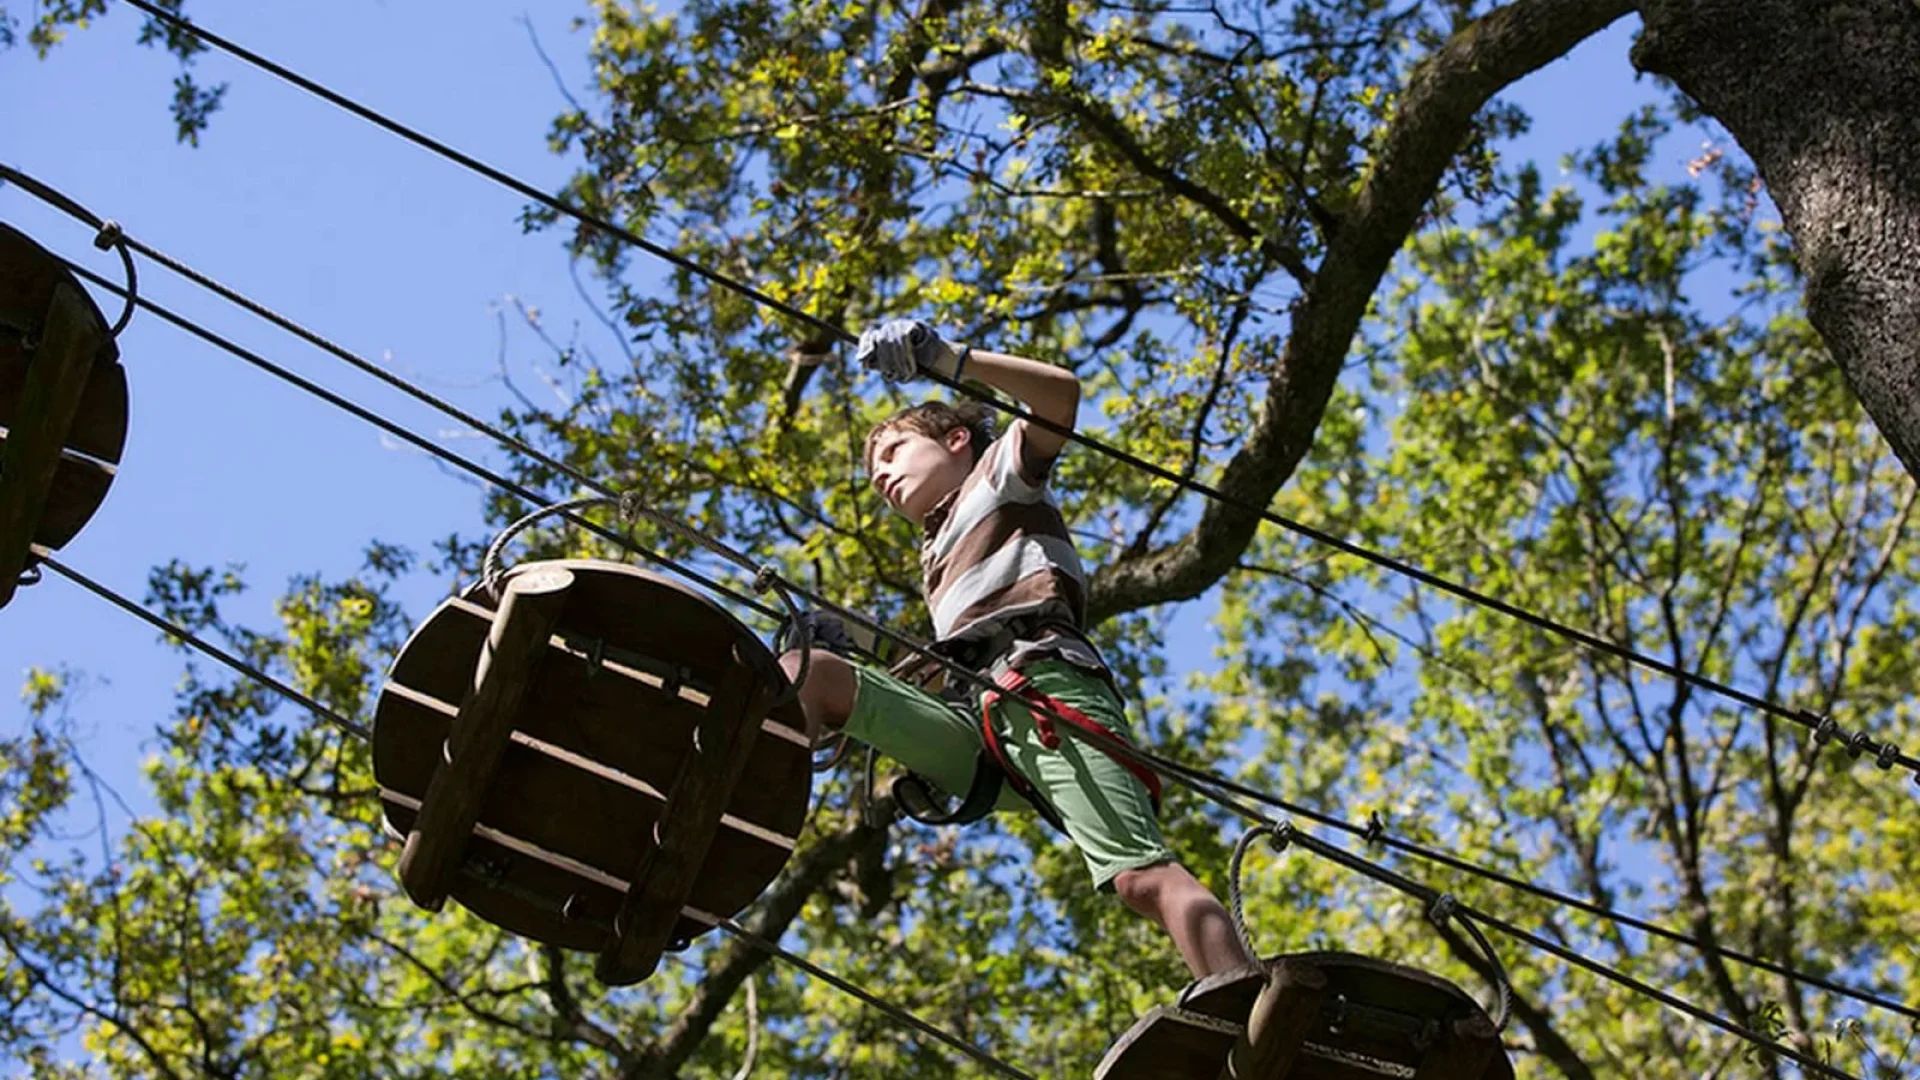 Madness woods adventure course in the trees for children